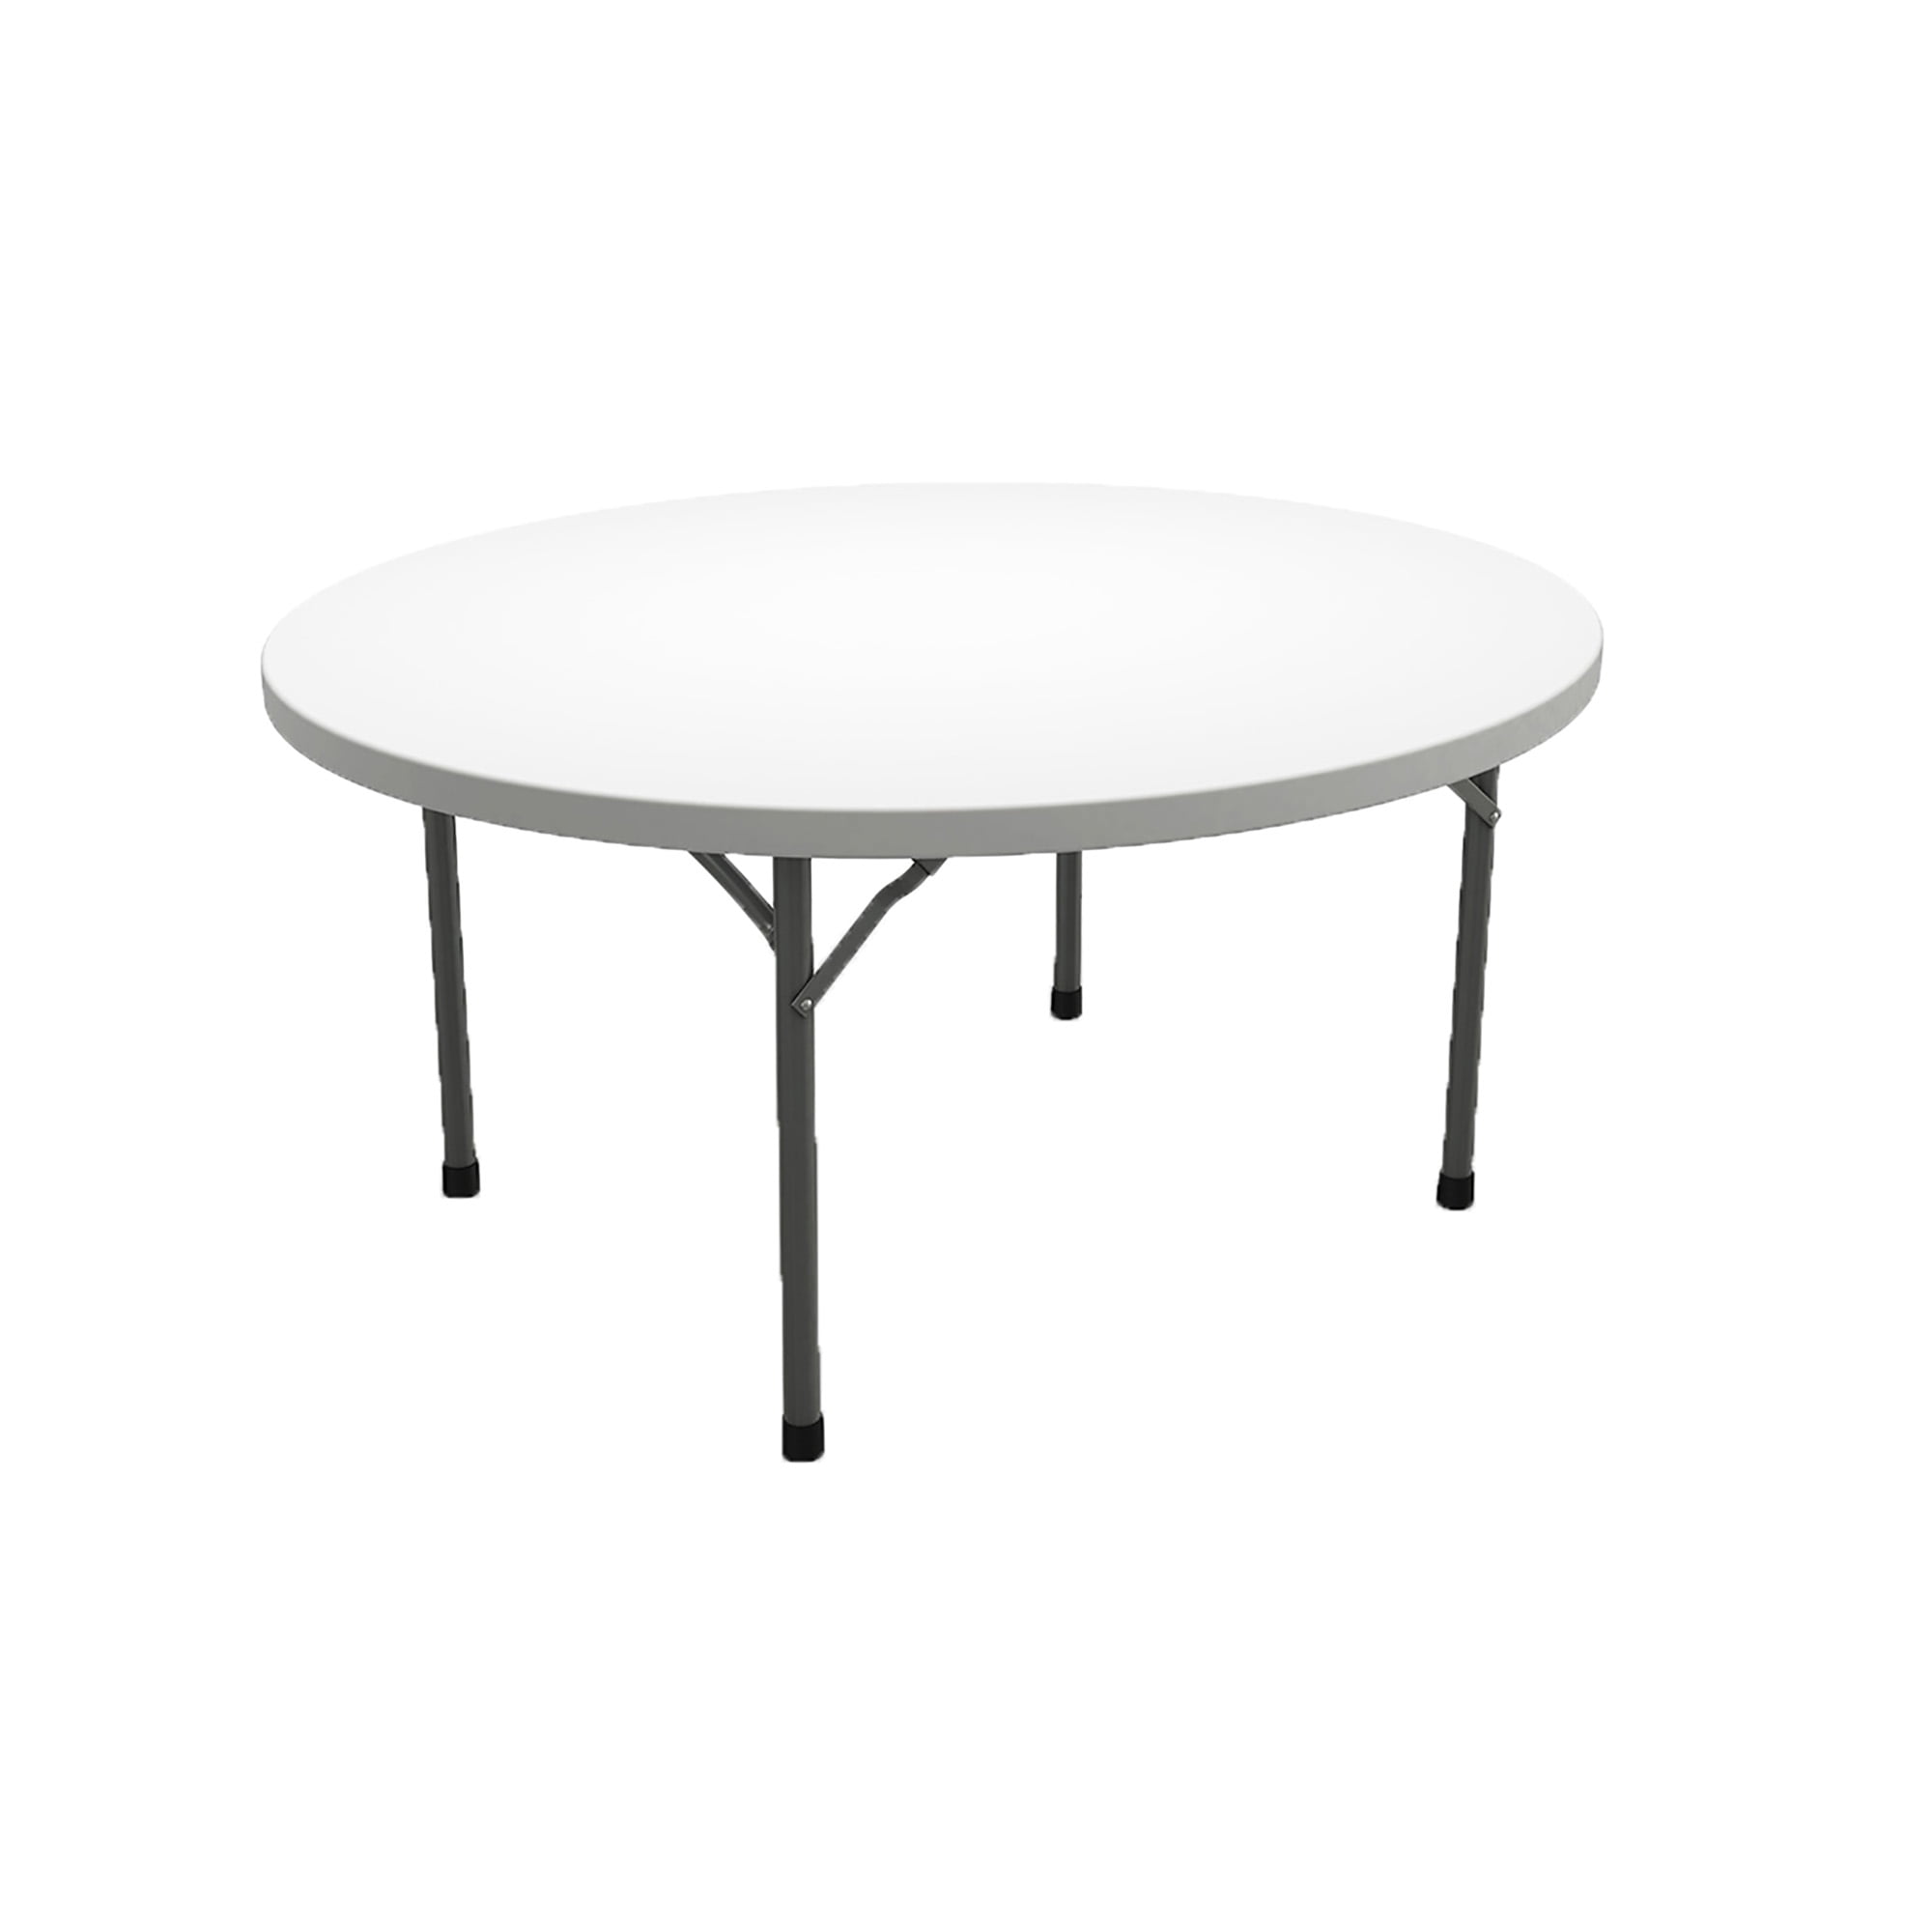 Lifetime 72 Inch Round Table 4 Pack, Lifetime Round Tables 720